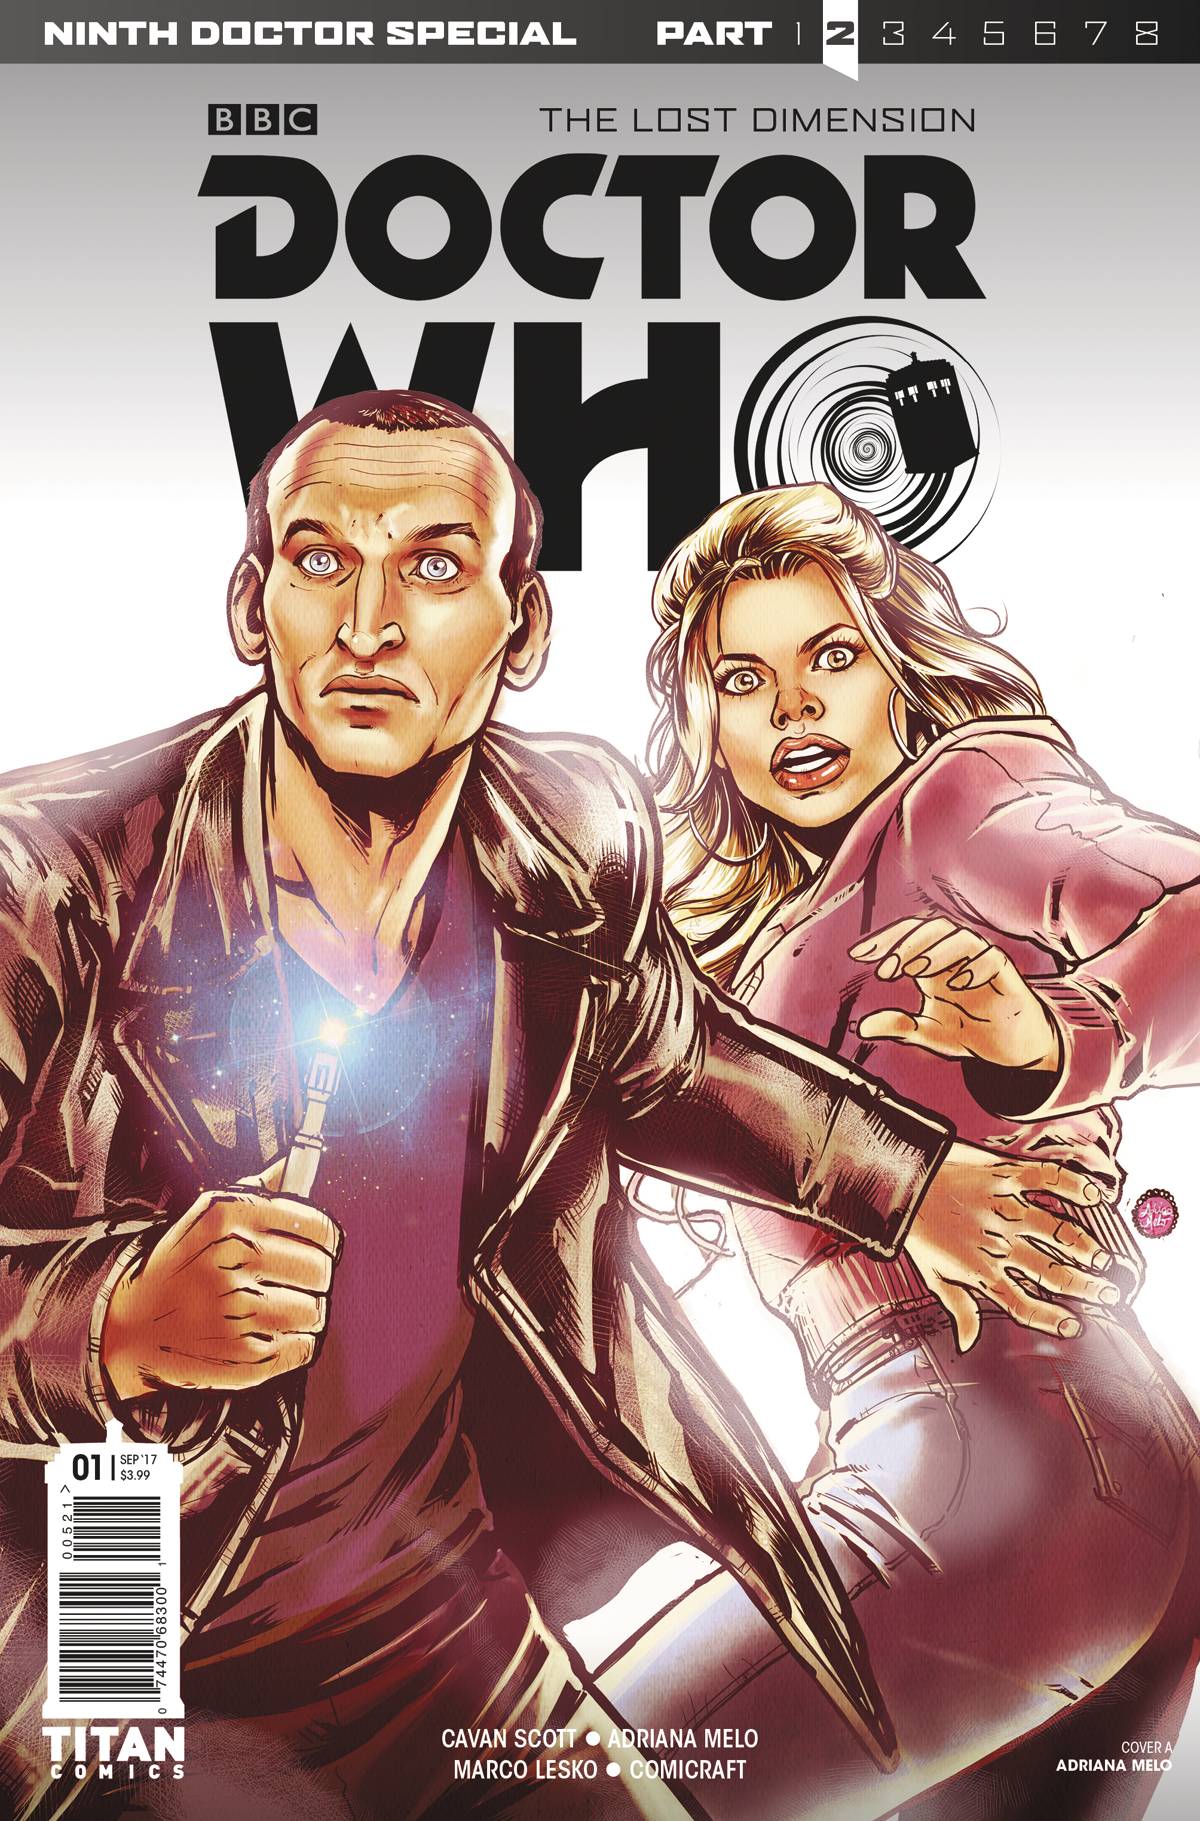 DOCTOR WHO: THE NINTH DOCTOR SPECIAL